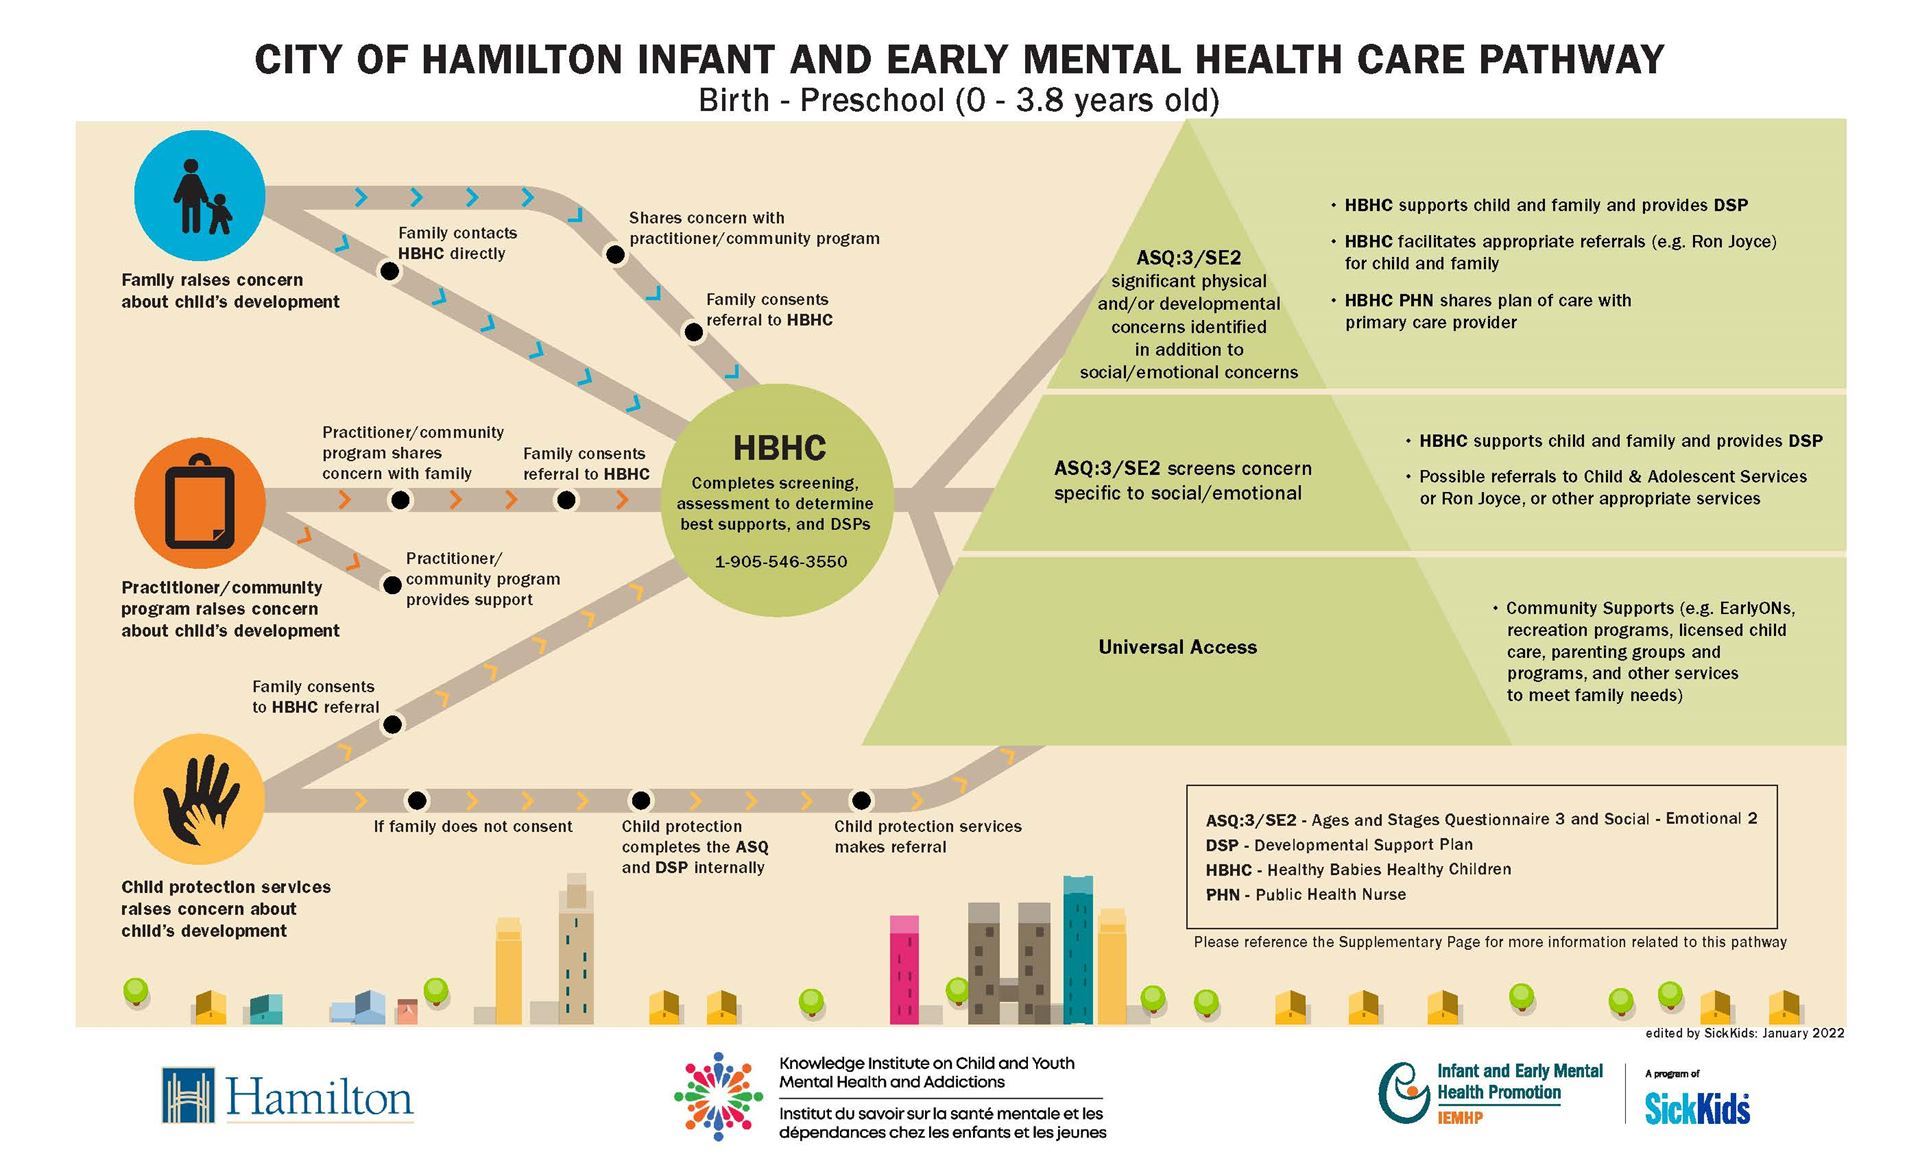 An Example of a Care Pathway developed with the City of Hamilton